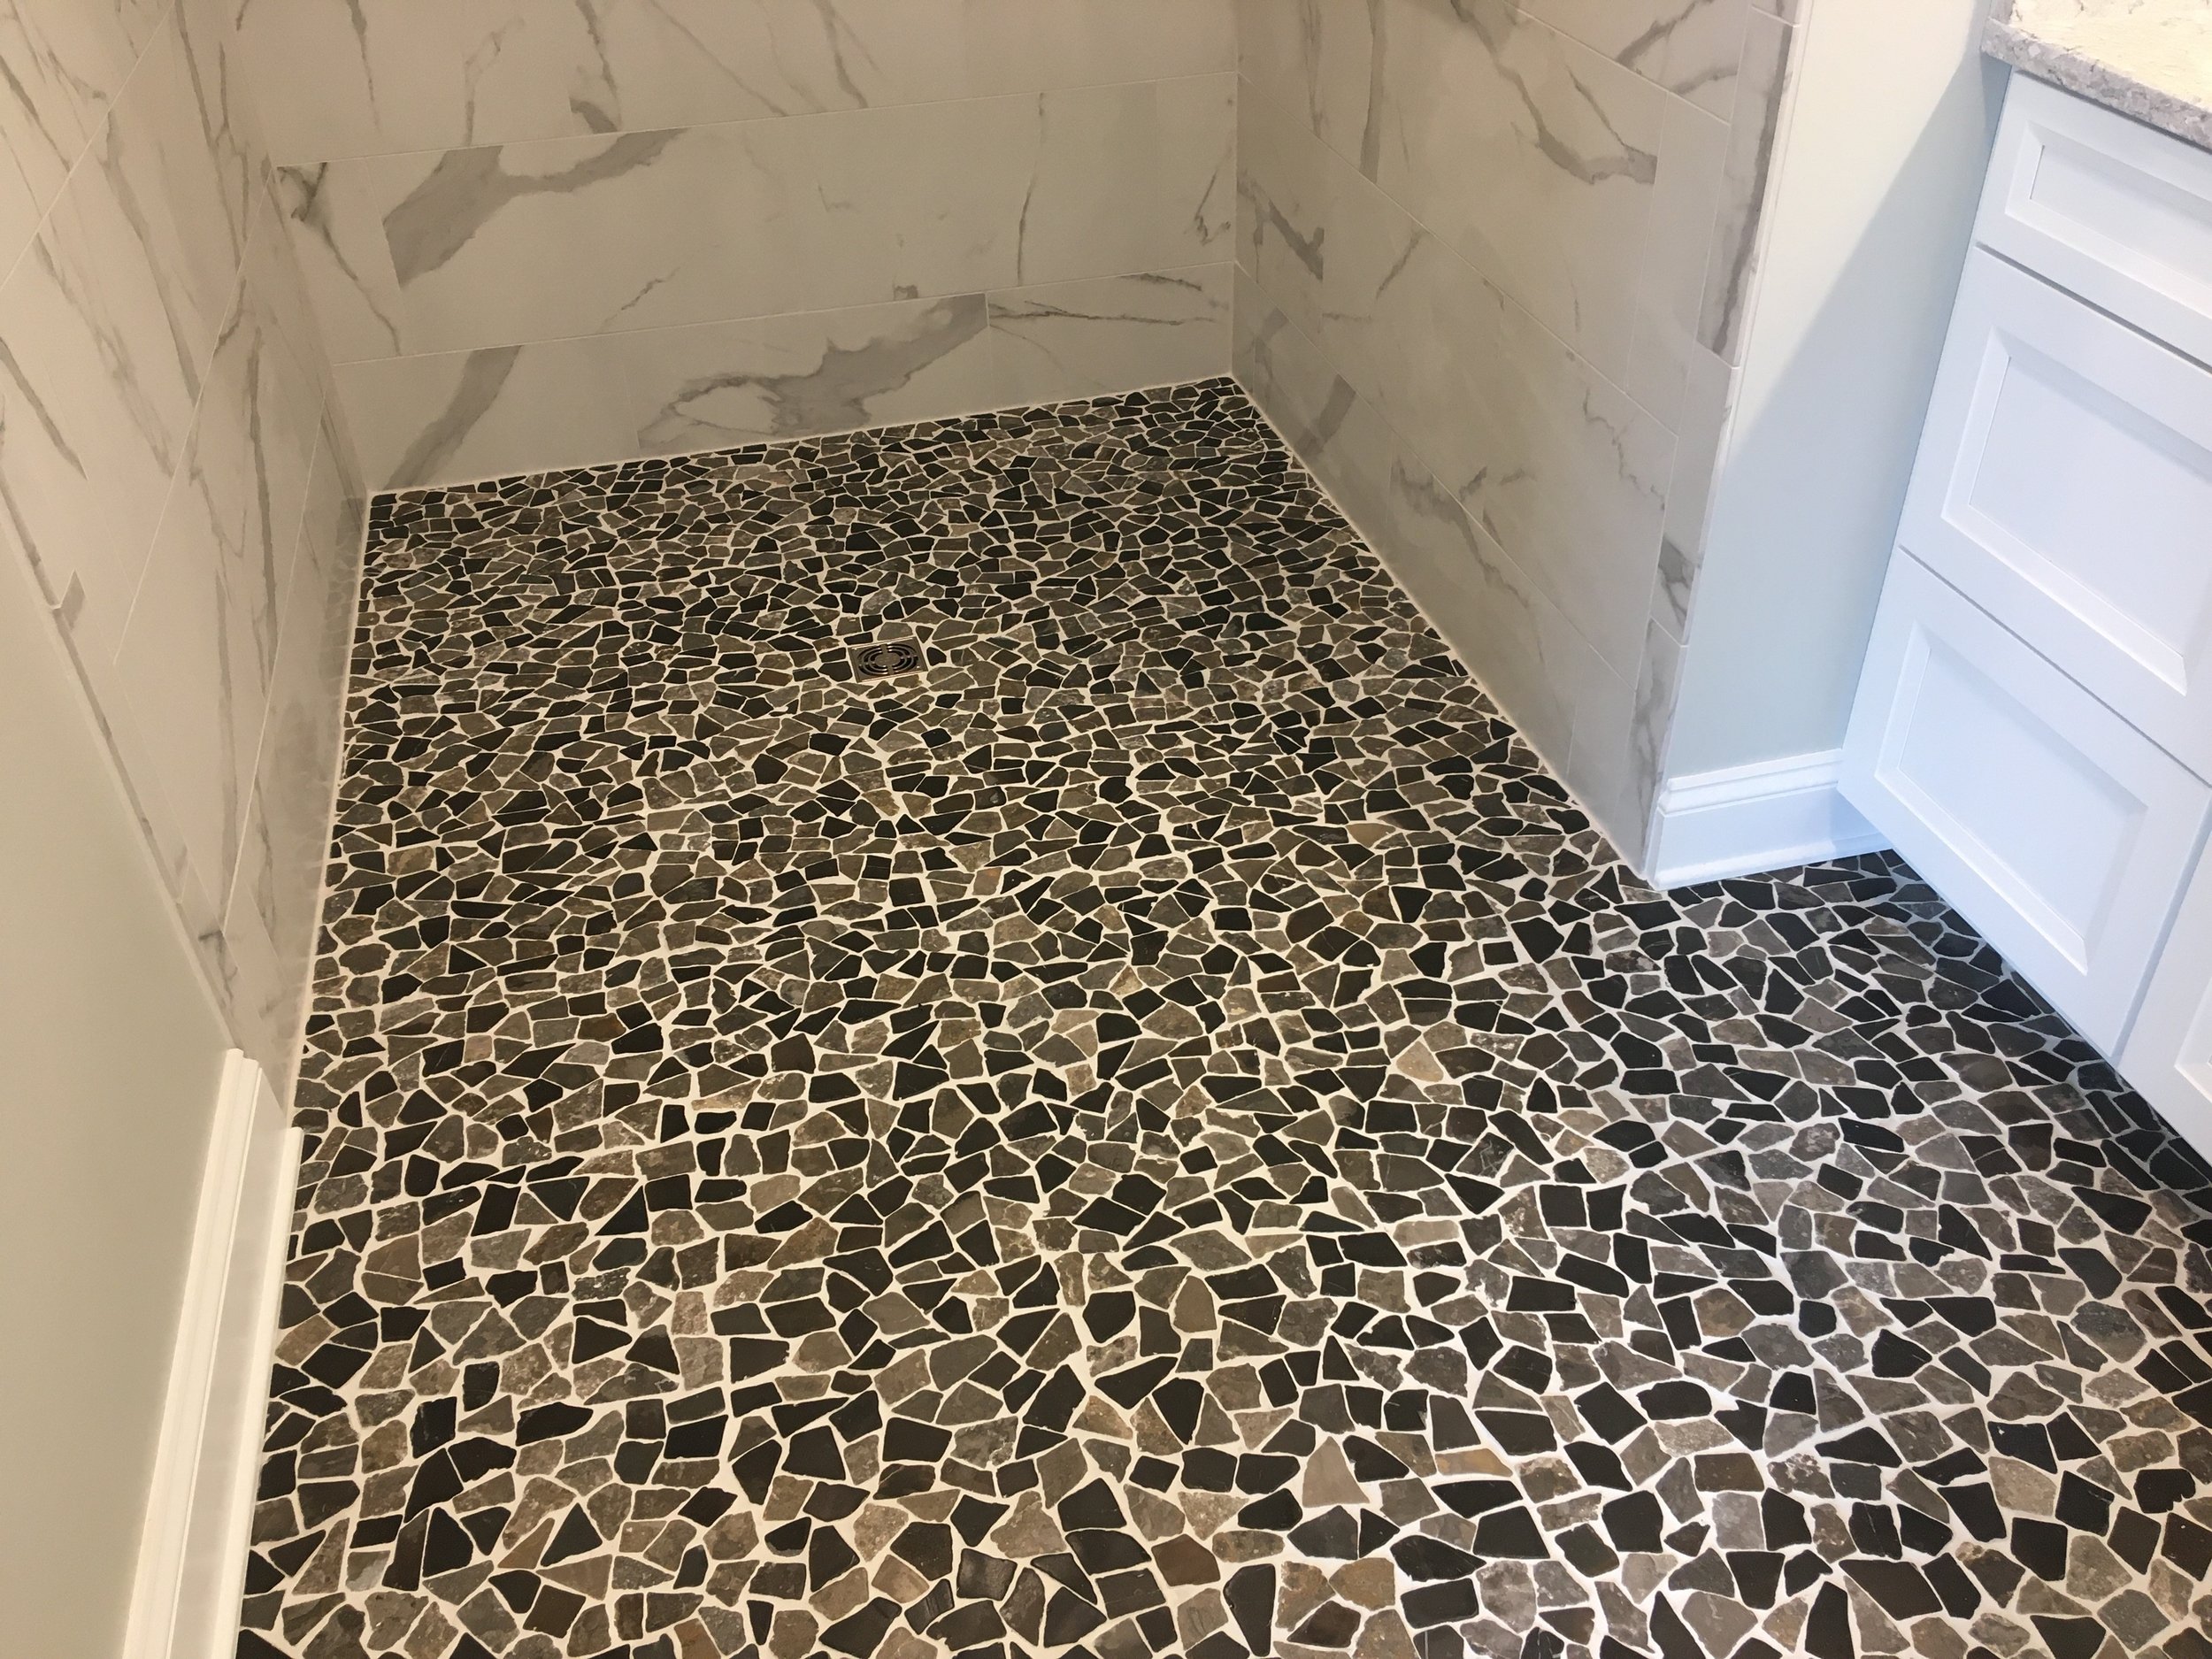  Recently completed bathroom with no threshold, with a ‘River Rock’ tile floor and 12 by 24 inch wall tile. 